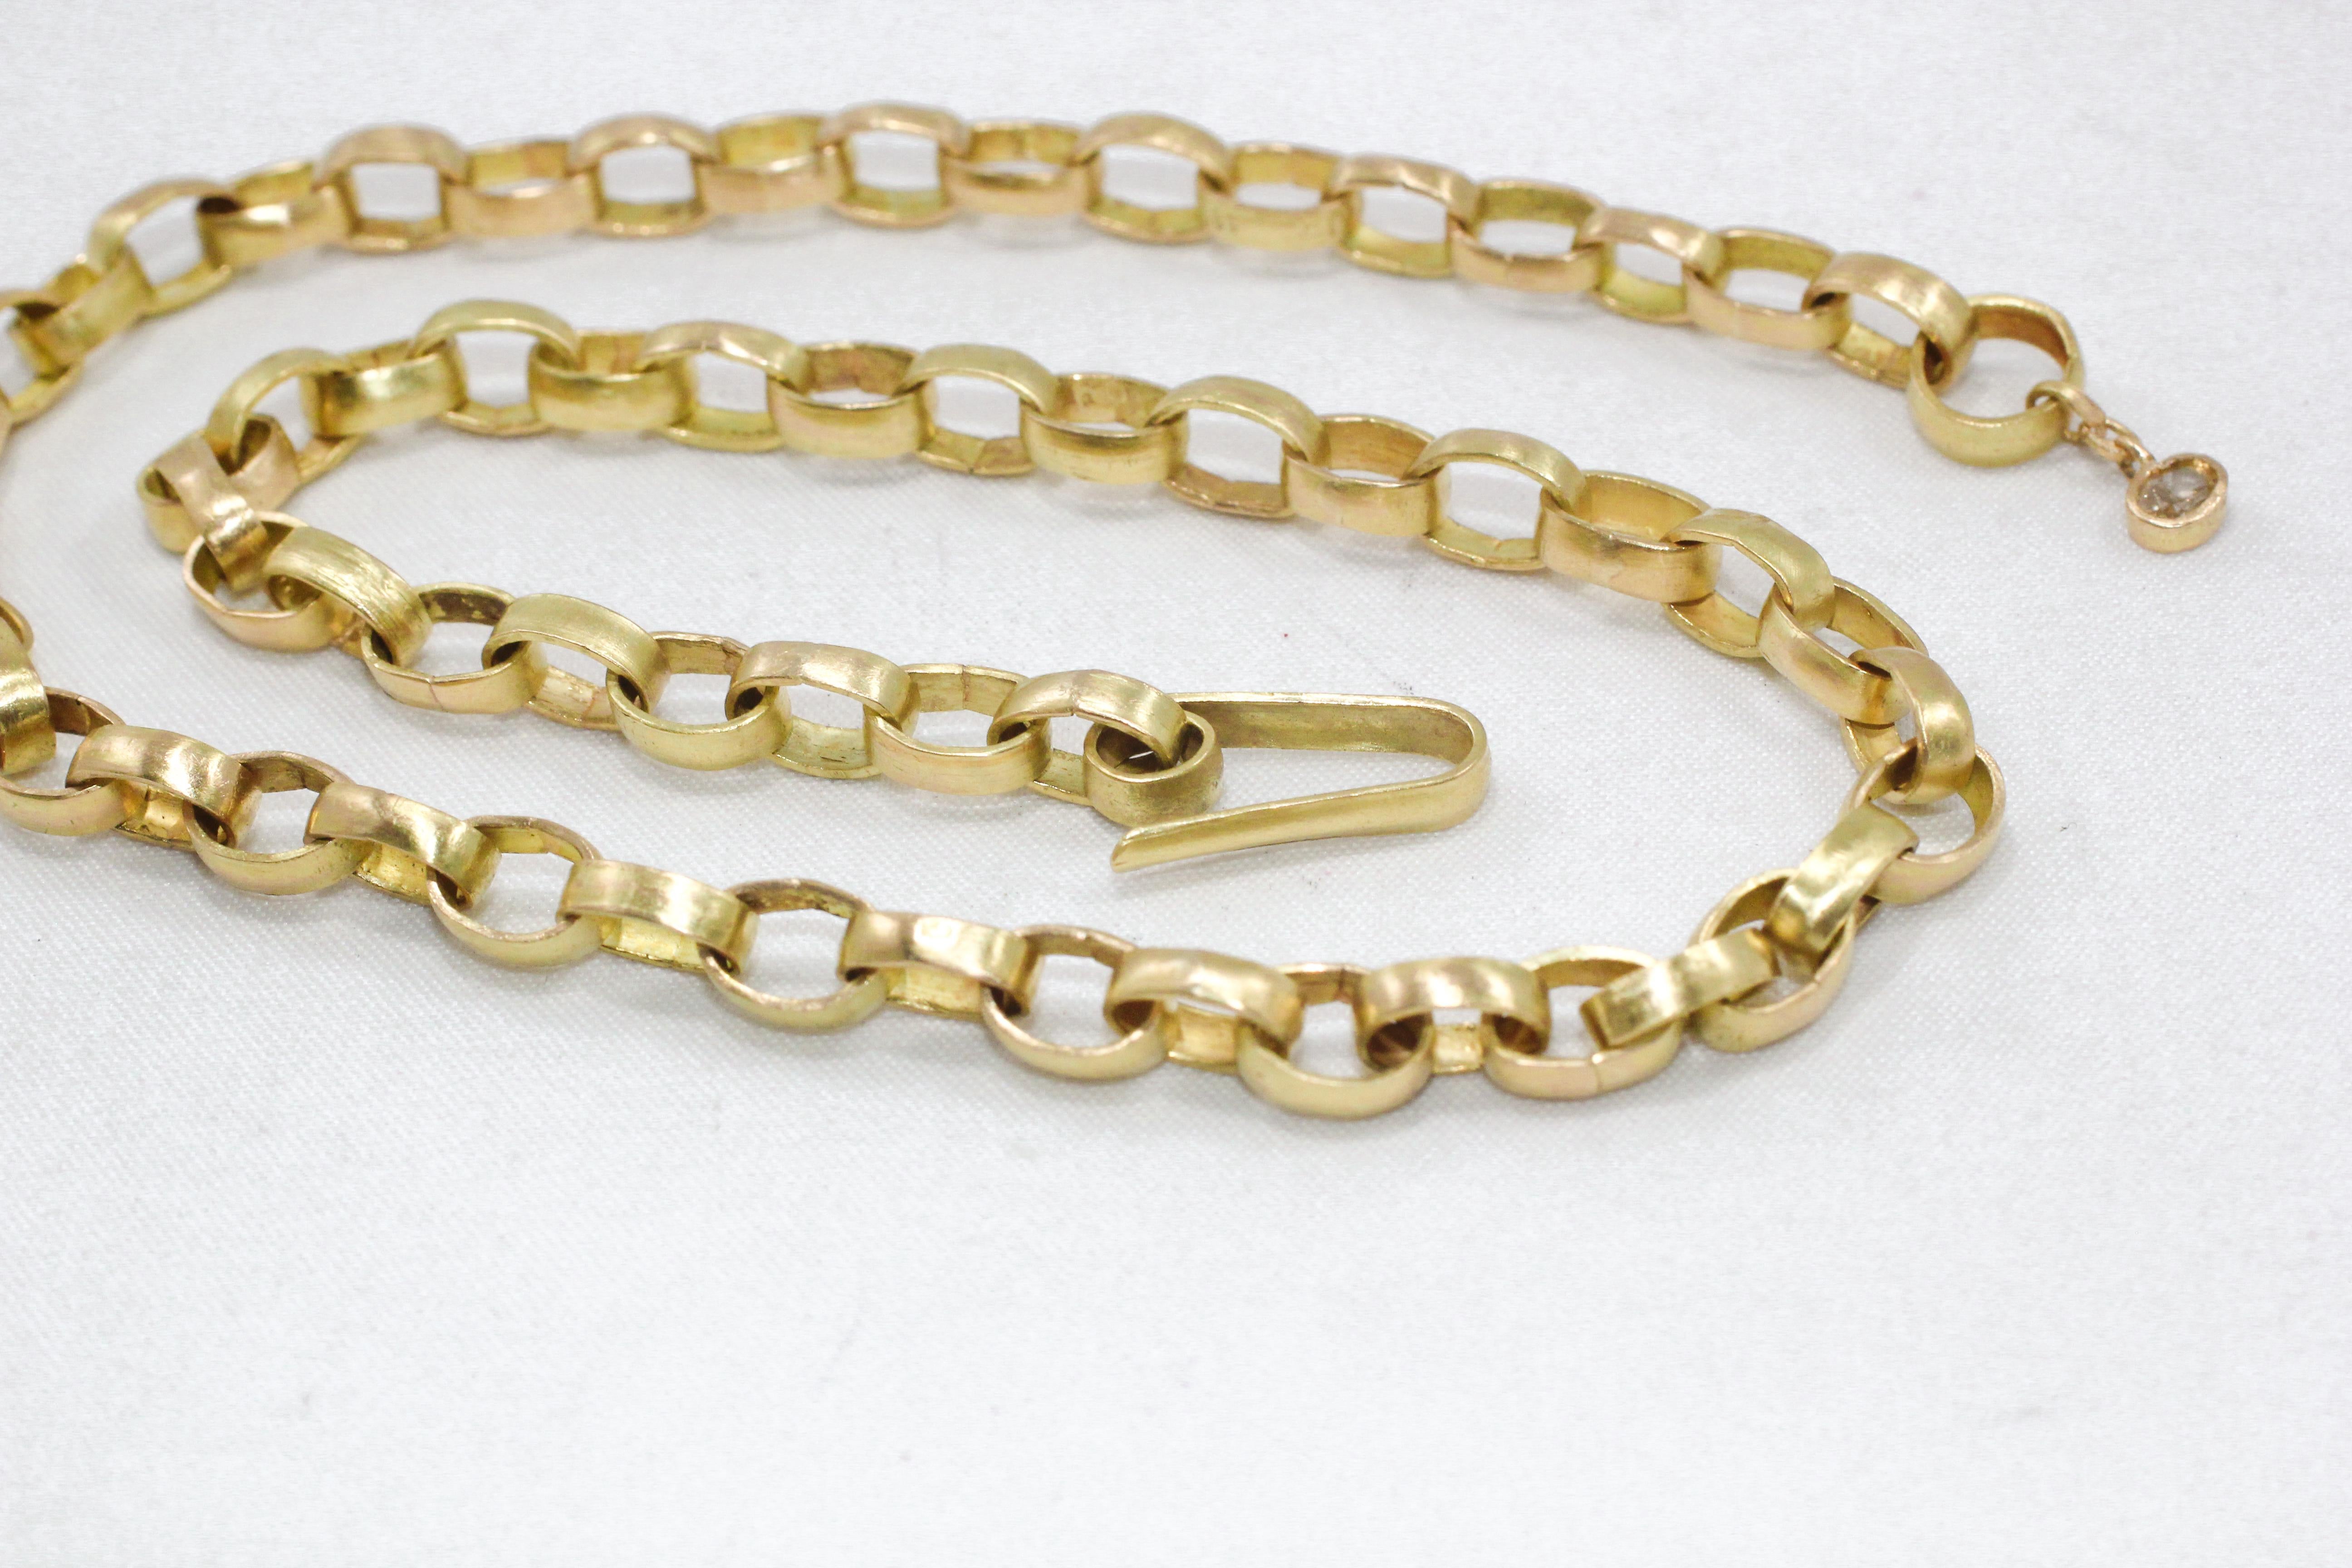 Custom listing. A substantial link chain choker handcrafted in recycled 18K gold. Makes a bold and elegant statement in any season. It is made of environmentally friendly recycled 18 Karat gold. The necklace is made up of oval uniformly shaped